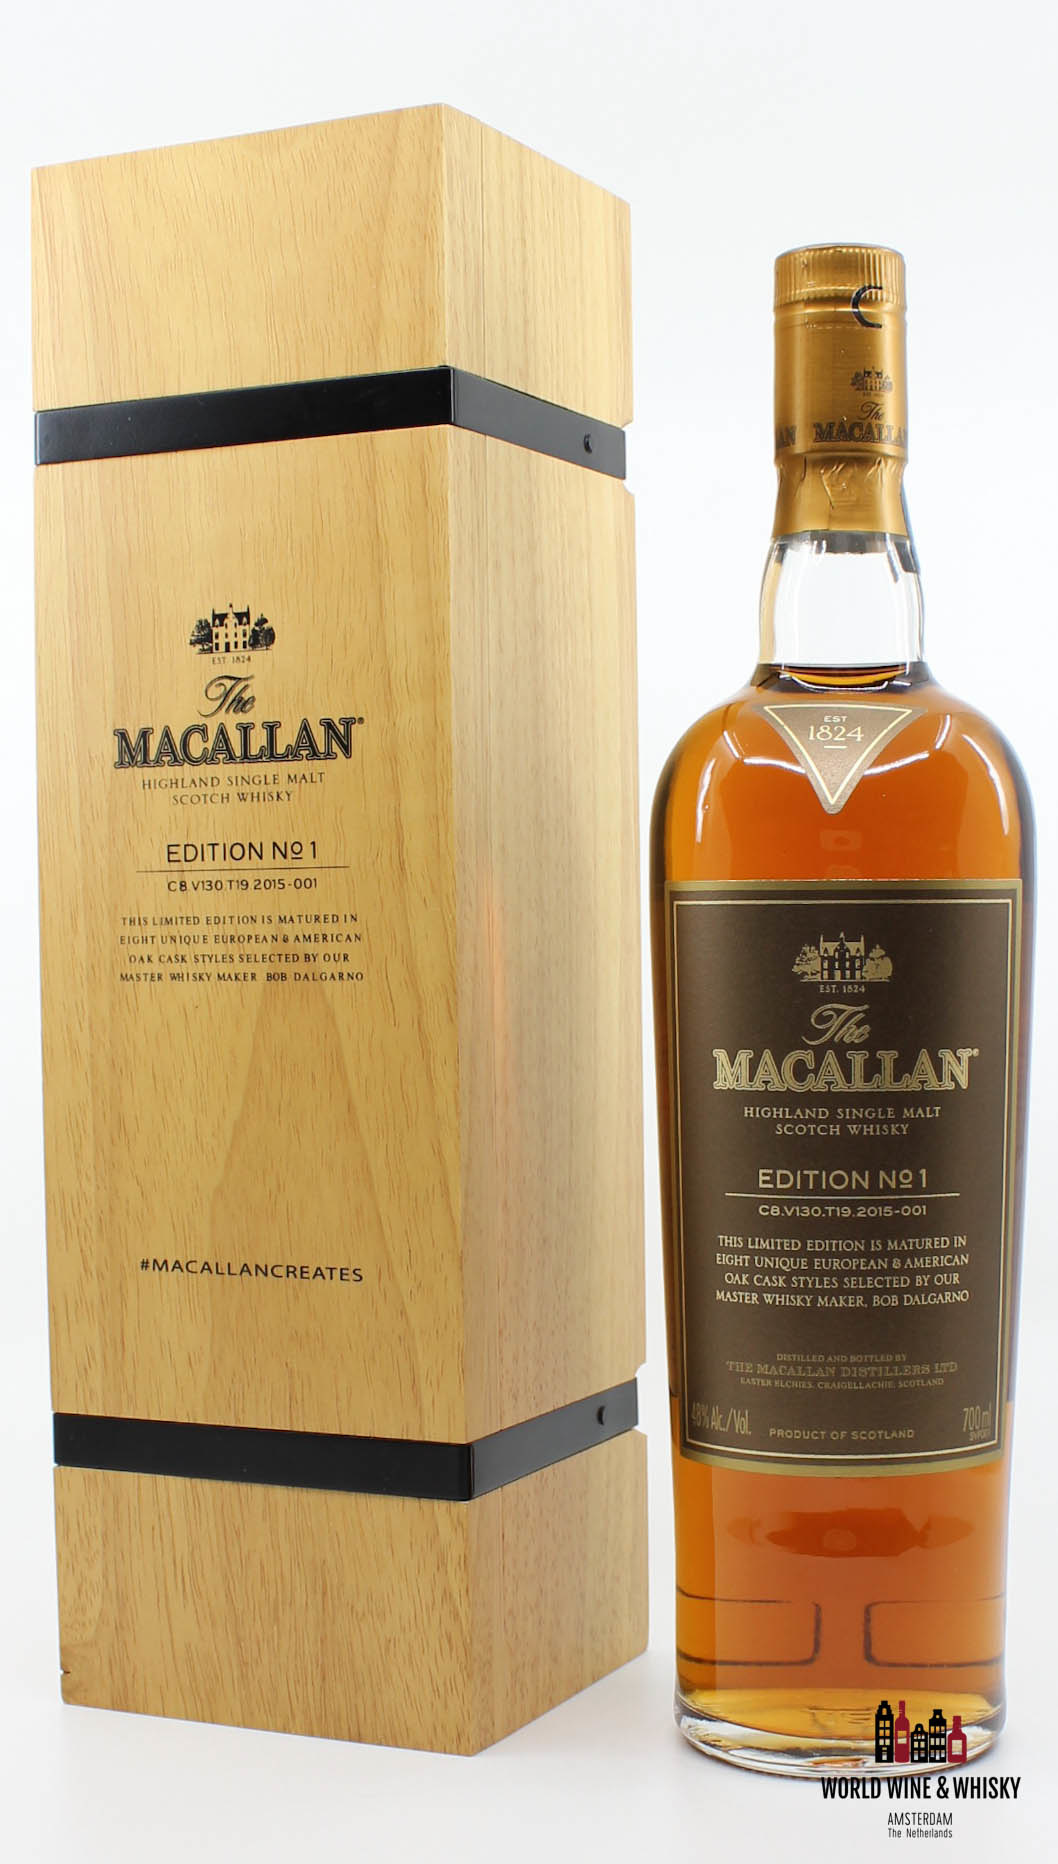 The Macallan No 1 Edition 2015 48 In Luxury Wooden Box World